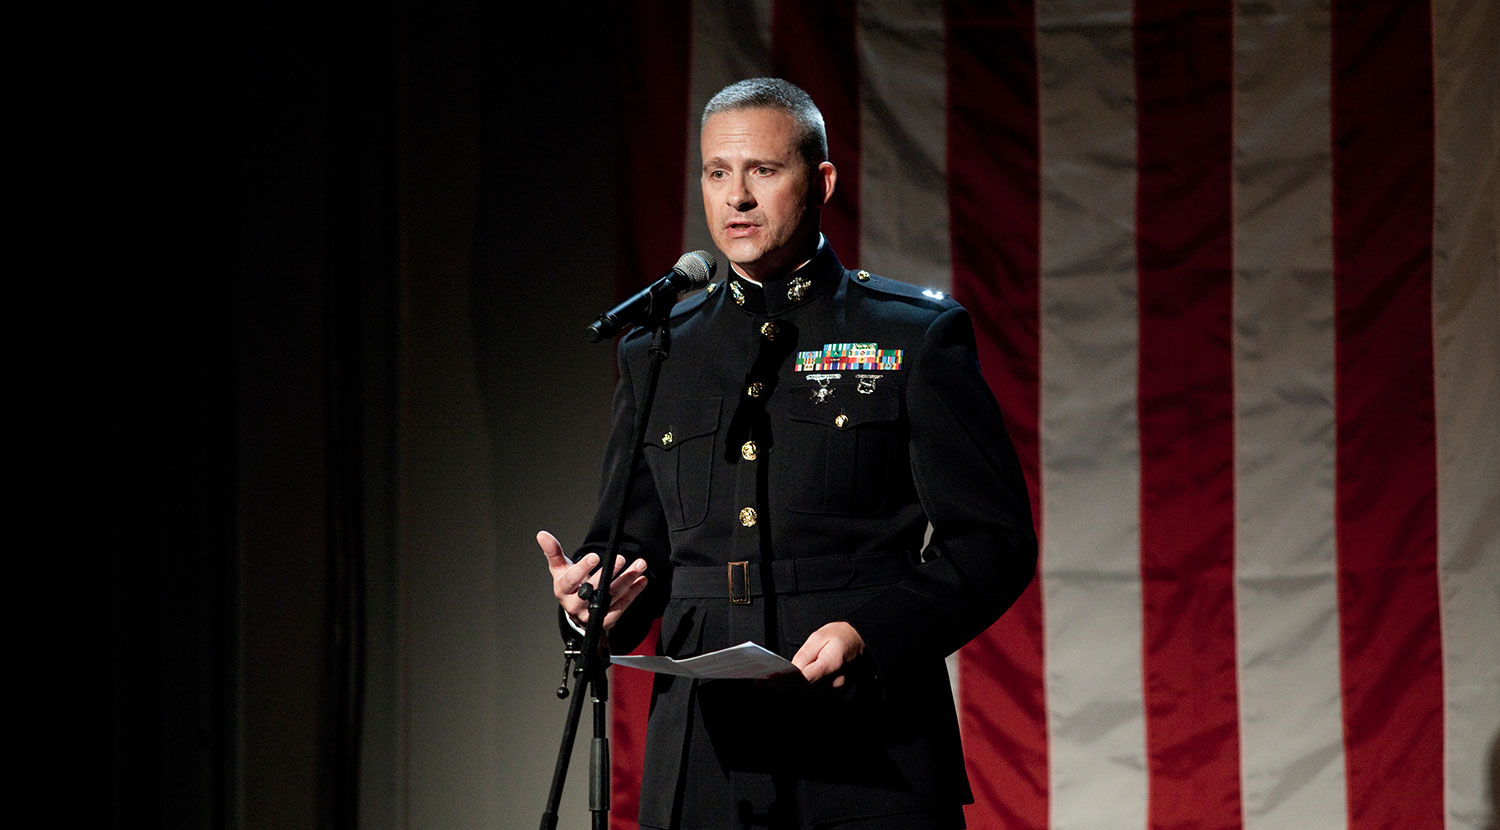 Captain Eric Tausch, Acting Director of Public Affairs for the United States Marine Corps